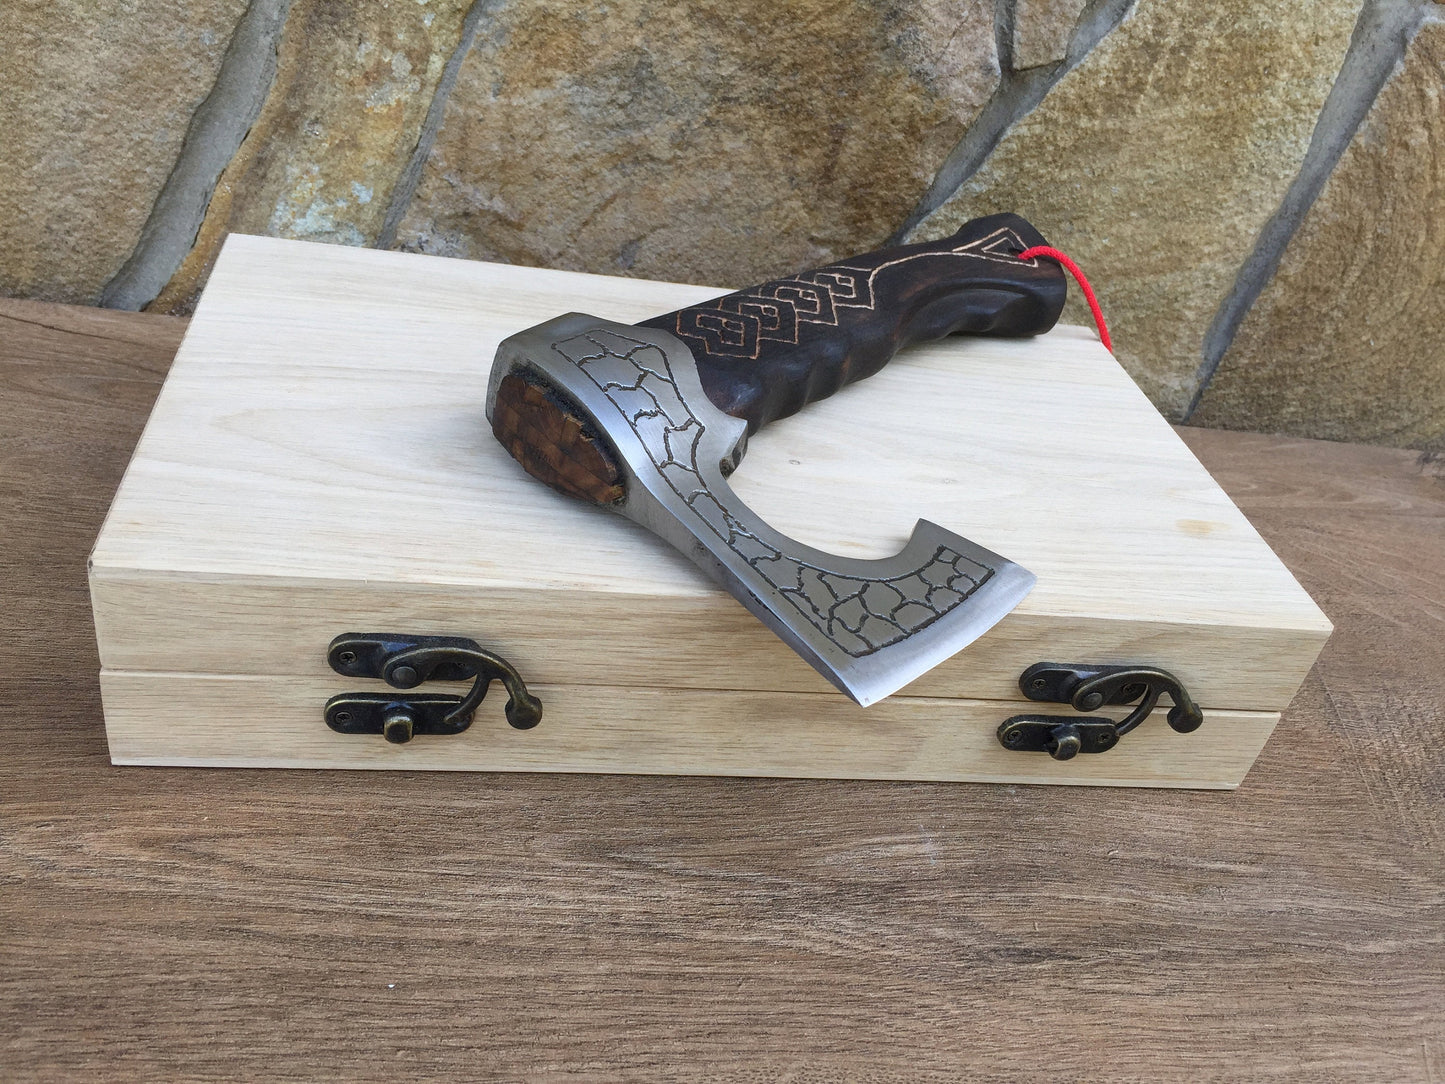 Viking axe in a wooden box, personalized gift, mens gifts, medieval axe, tomahawk, throwing axe, hatchet, personalized axe, engraved axe, ax